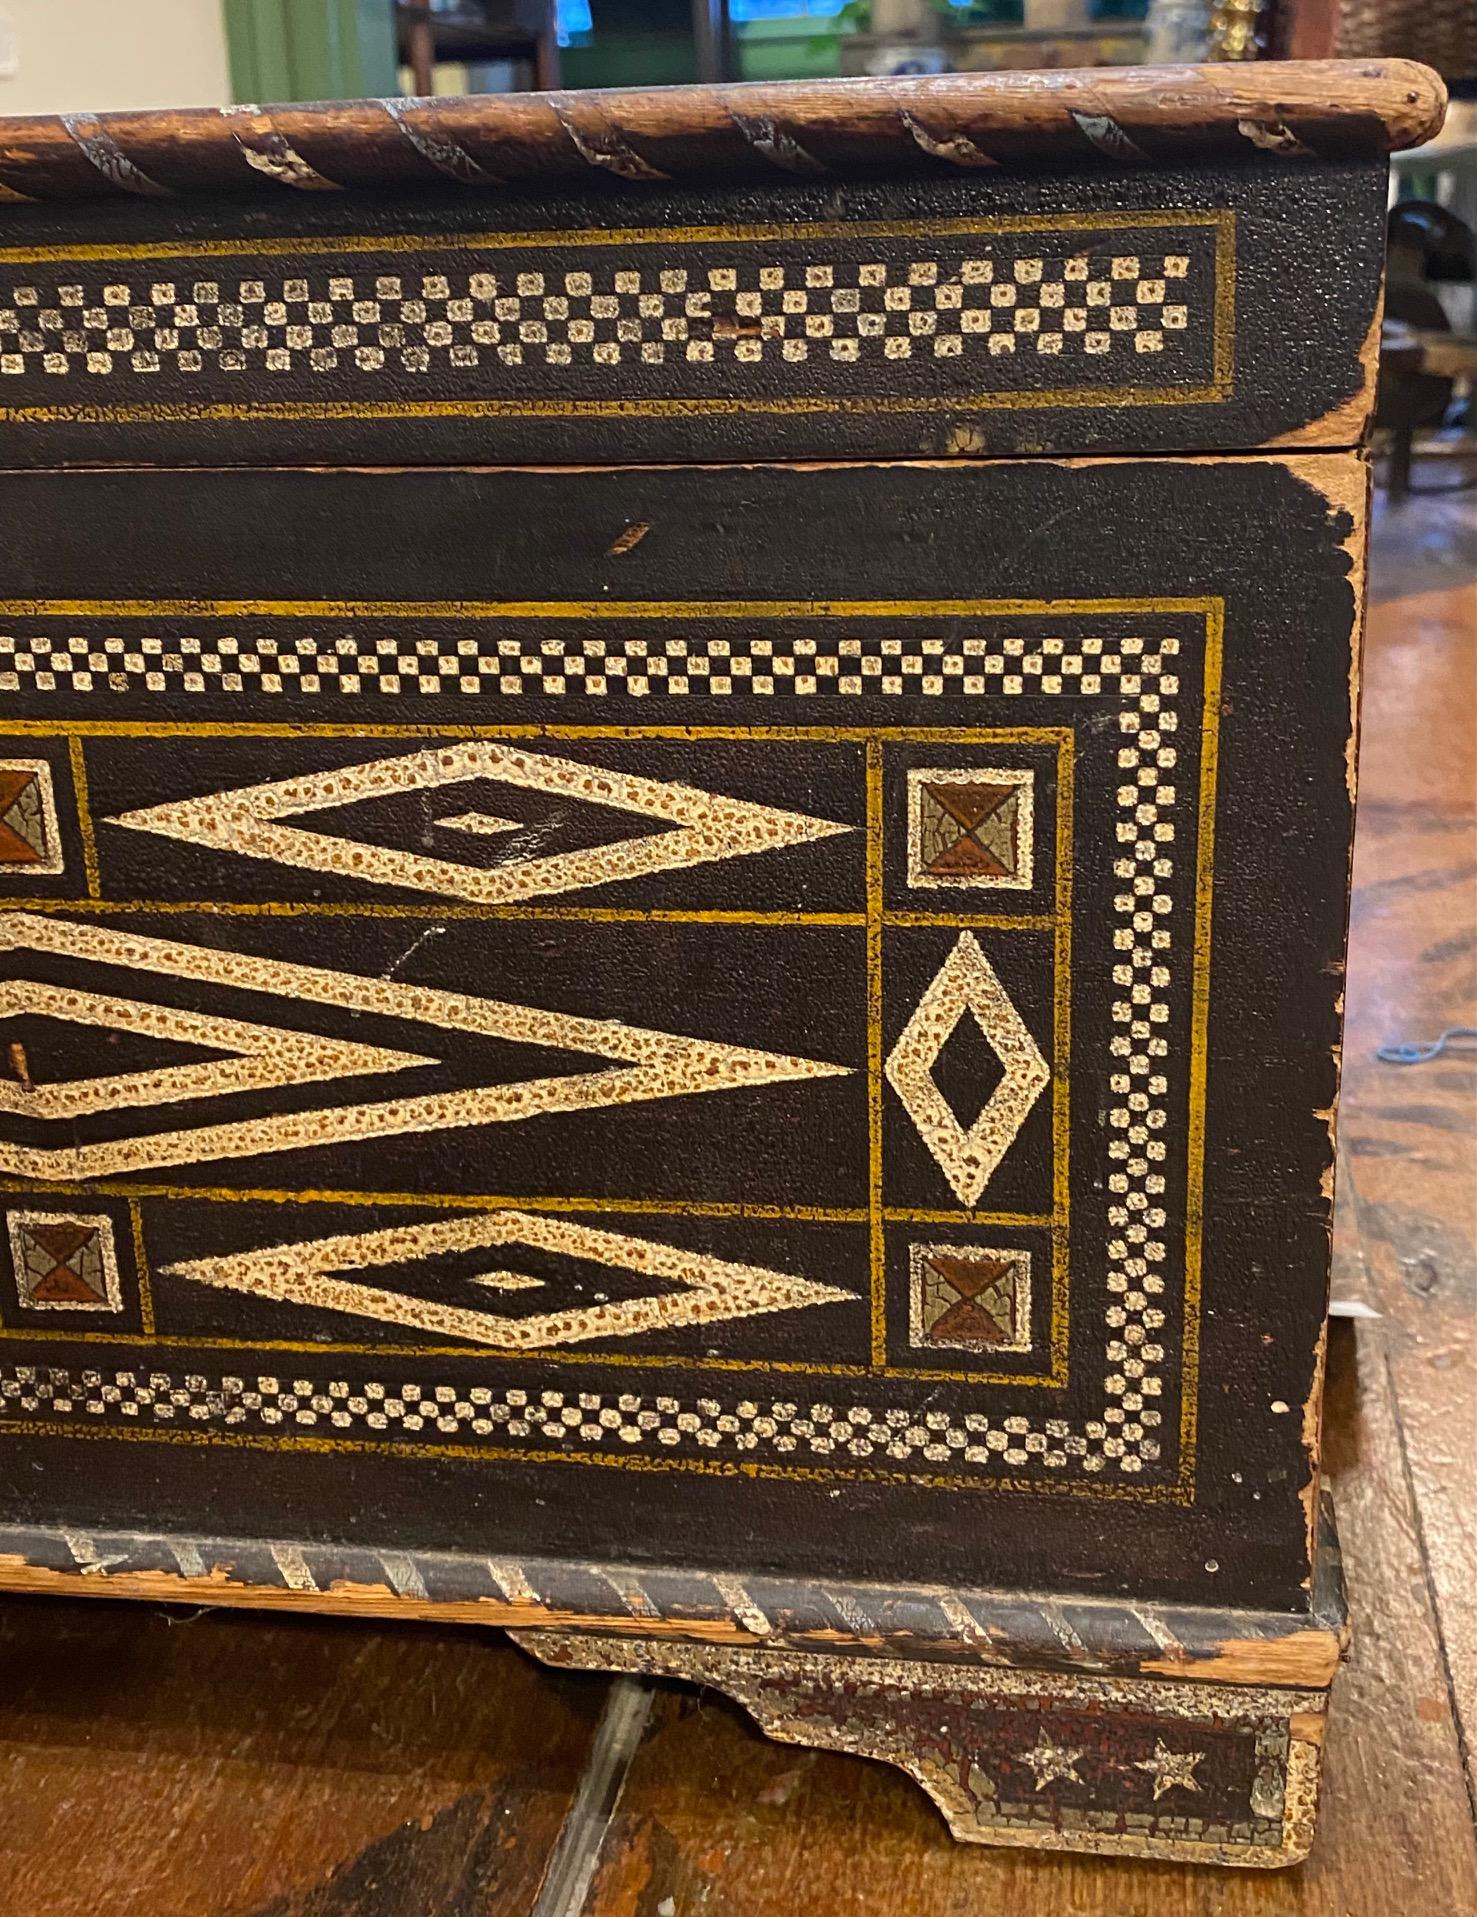 Vintage Folk Art Decorated Wooden Chest or Footlocker, formerly the traveling chest of Big Band and cabaret singer Betty George, circa late 1940s to early 1950s, having an intricate geometric painted decoration reminiscent of the South Seas. The